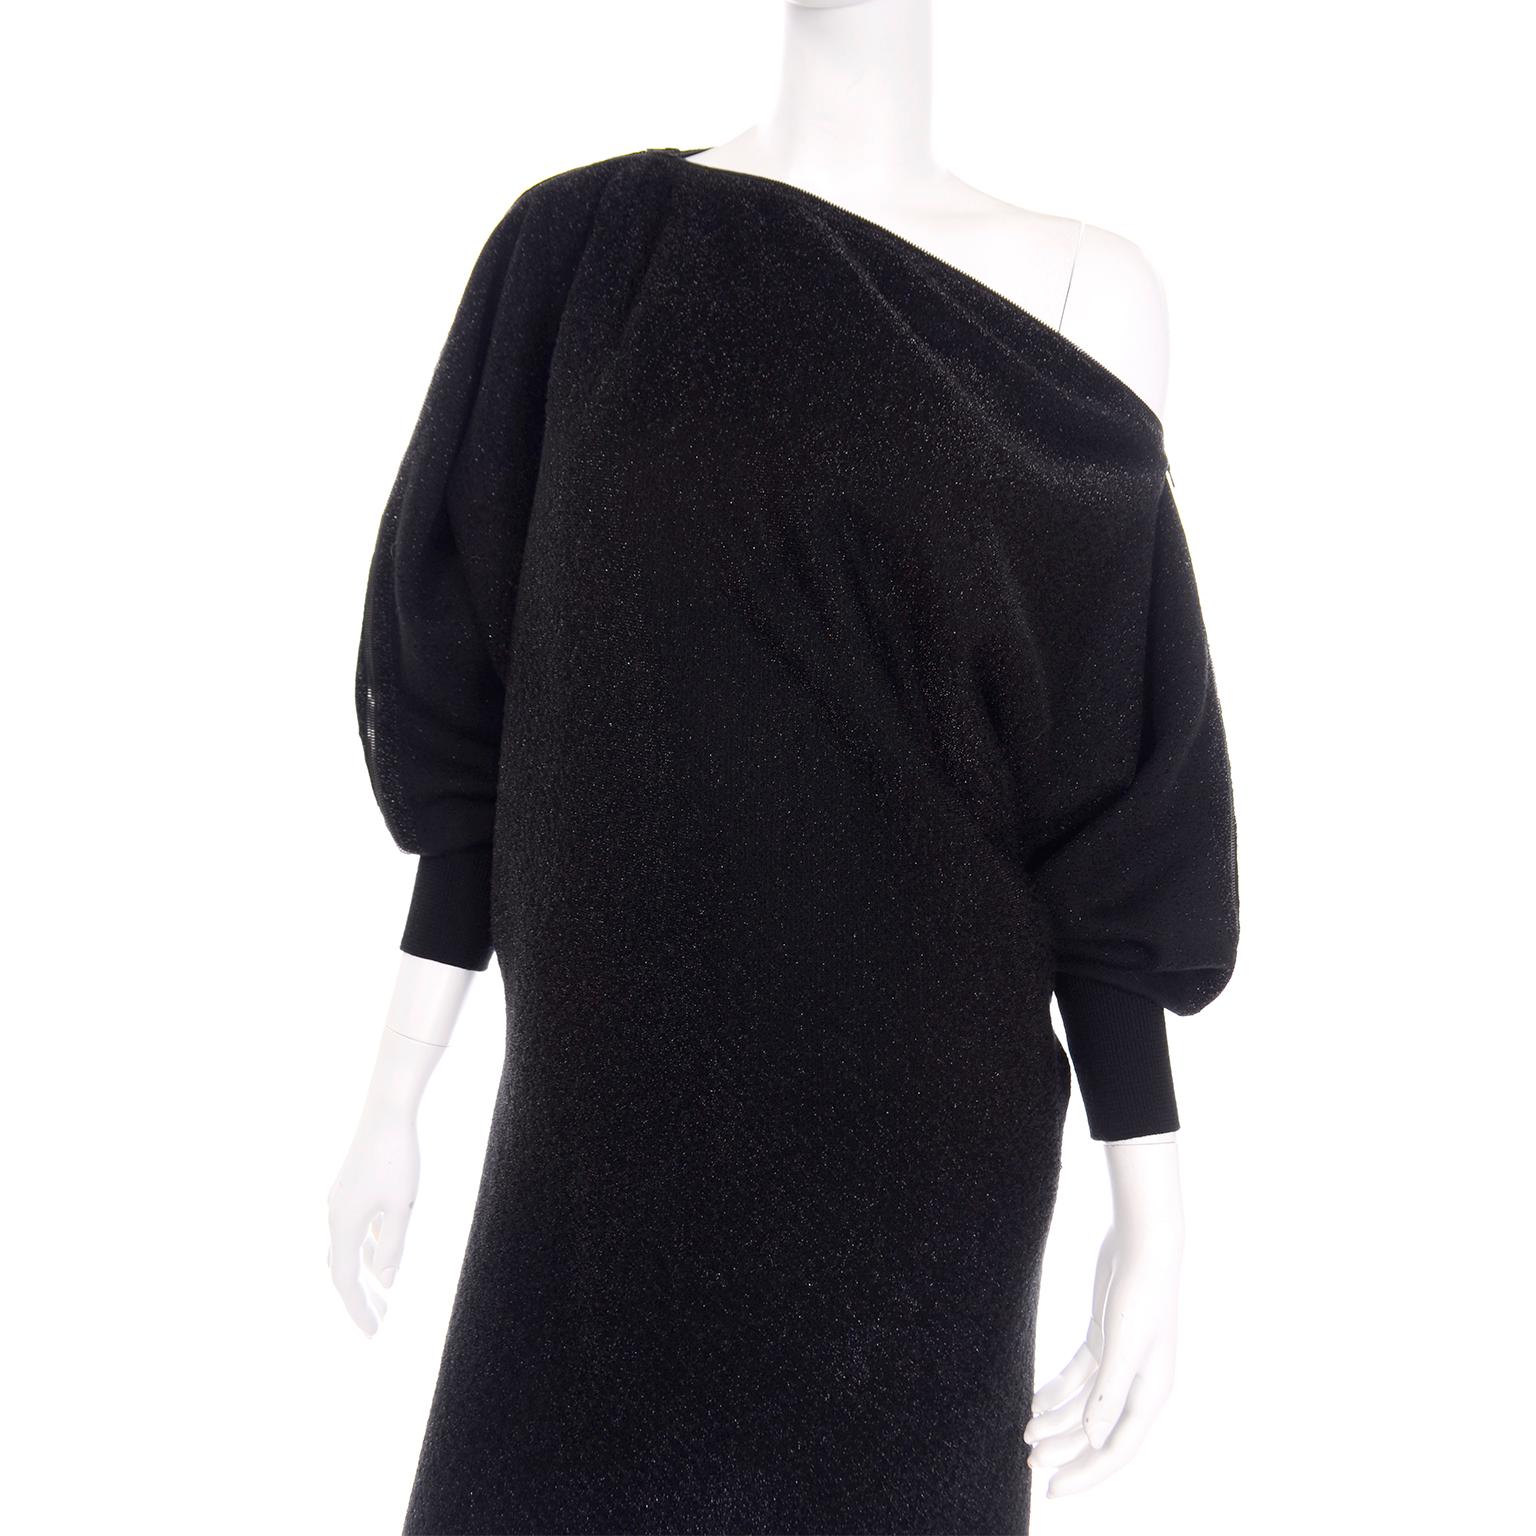 Jean Paul Gaultier Vintage Black Sparkle Zipper Dress with Dramatic Sleeves 1